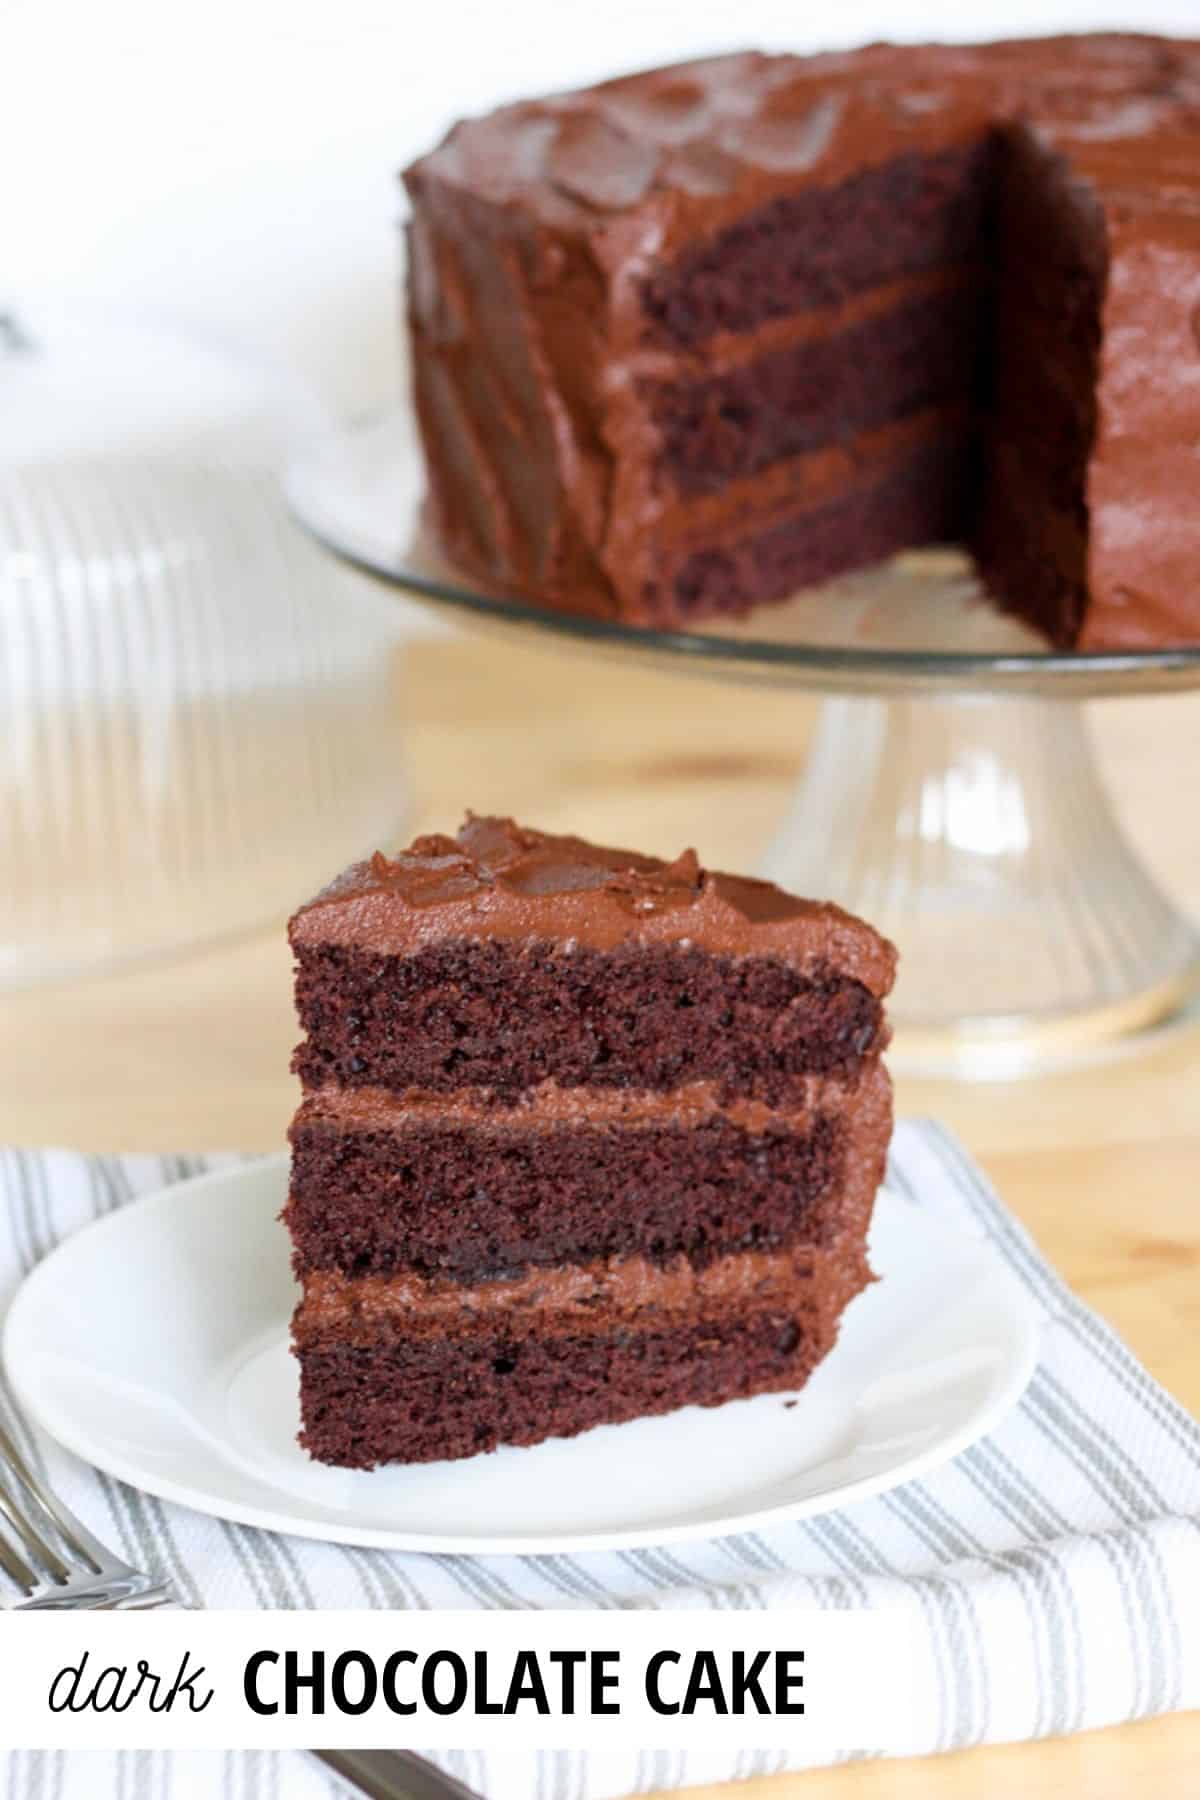 slice of dark chocolate cake on a plate with cake on cake stand in the background